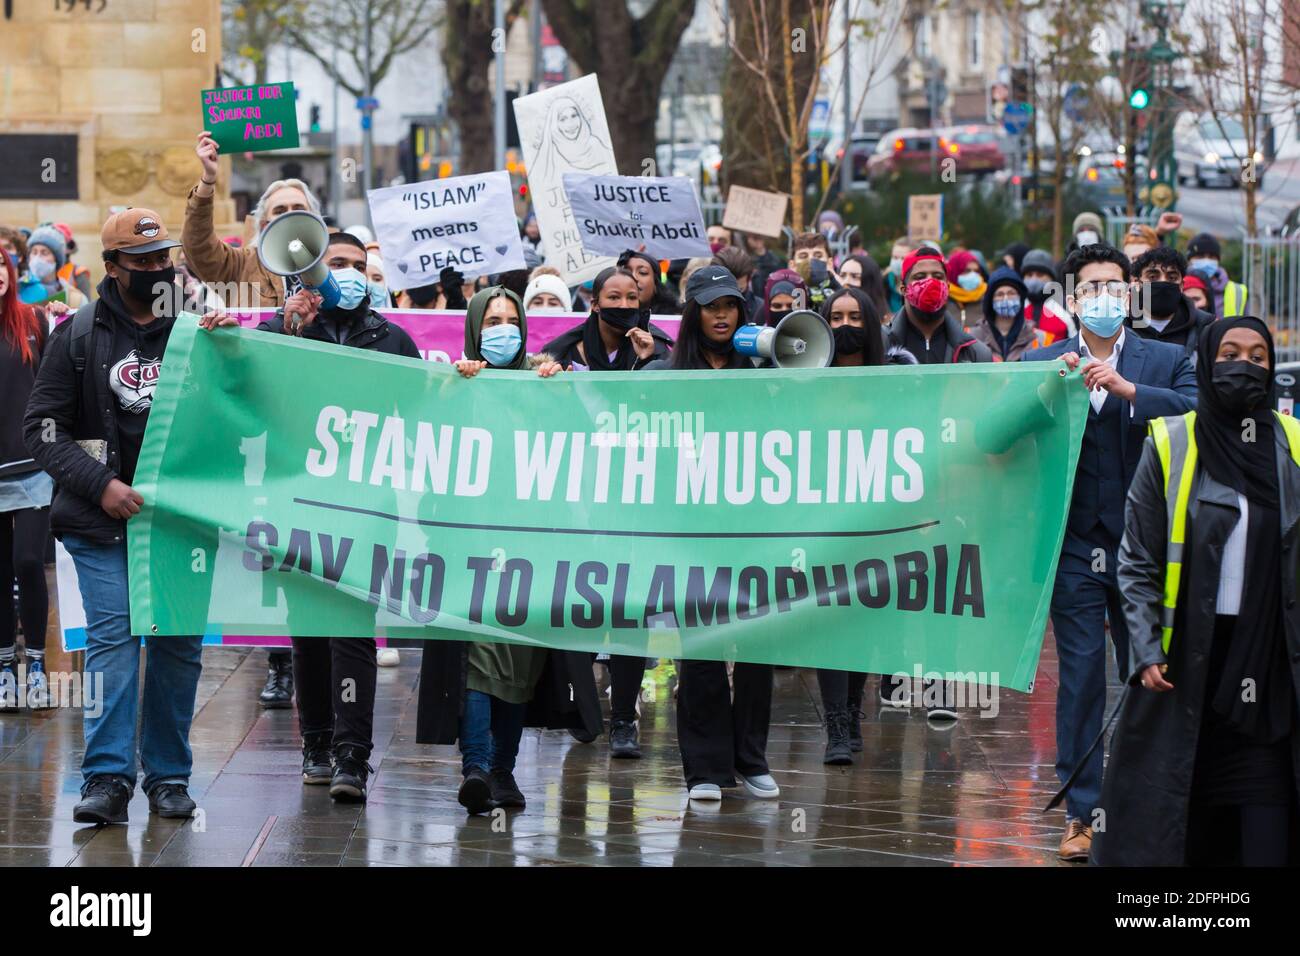 Bristol, UK. 6th Dec 2020. Anti- Islamophobia protesters march through Bristol city centre demanding more protection for Muslims. They condemned the French government’s actions towards Muslims and highlighted the case of Shukri Abdi who drowned in near Manchester, which they do not believe was an accident. Redorbital/Alamy Live News Stock Photo